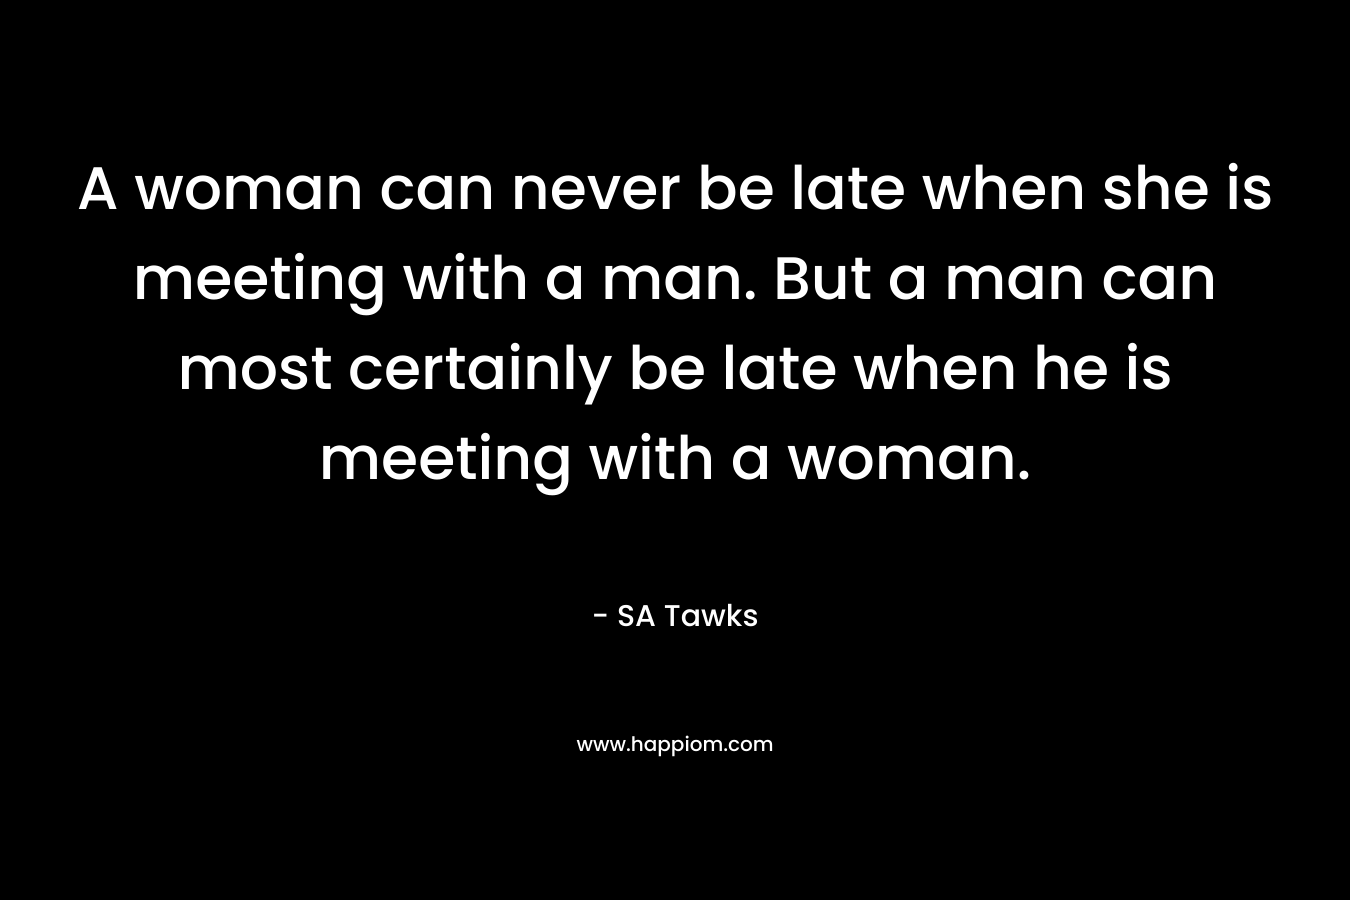 A woman can never be late when she is meeting with a man. But a man can most certainly be late when he is meeting with a woman.